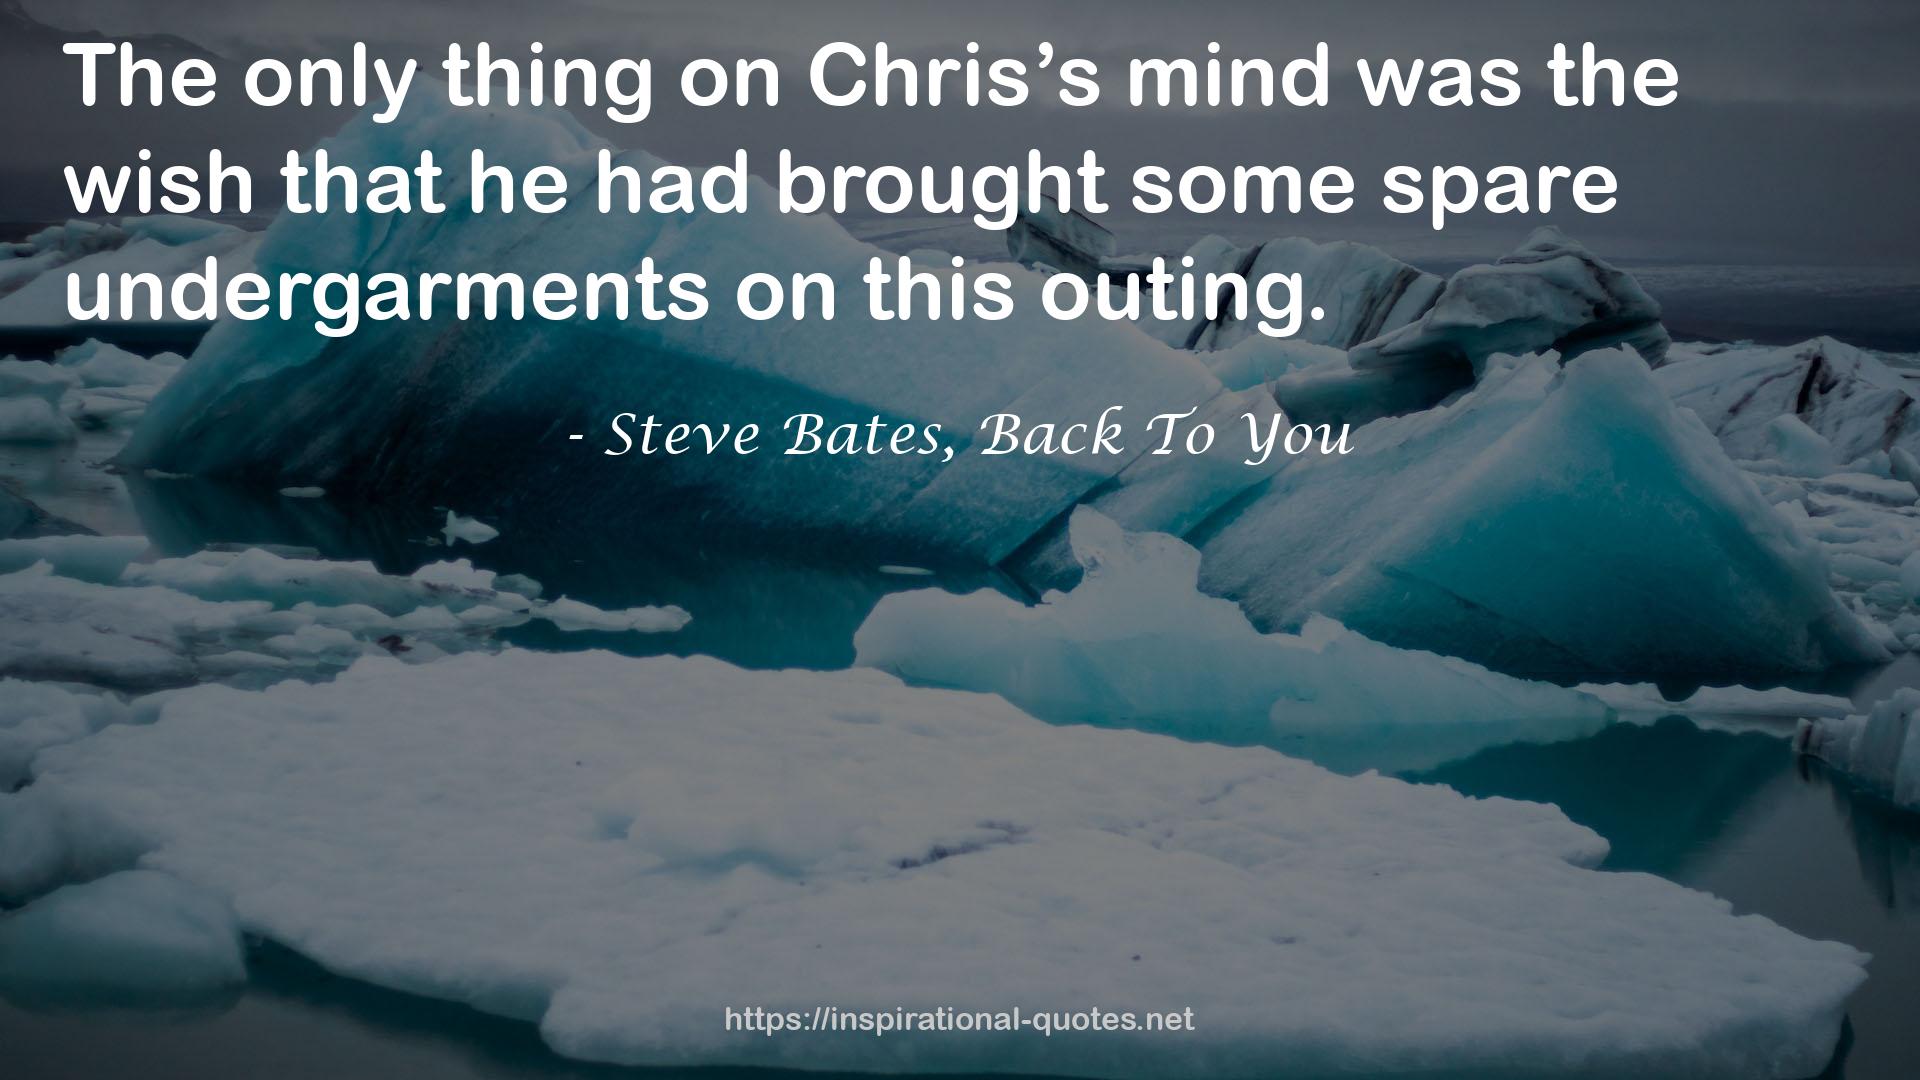 Steve Bates, Back To You QUOTES